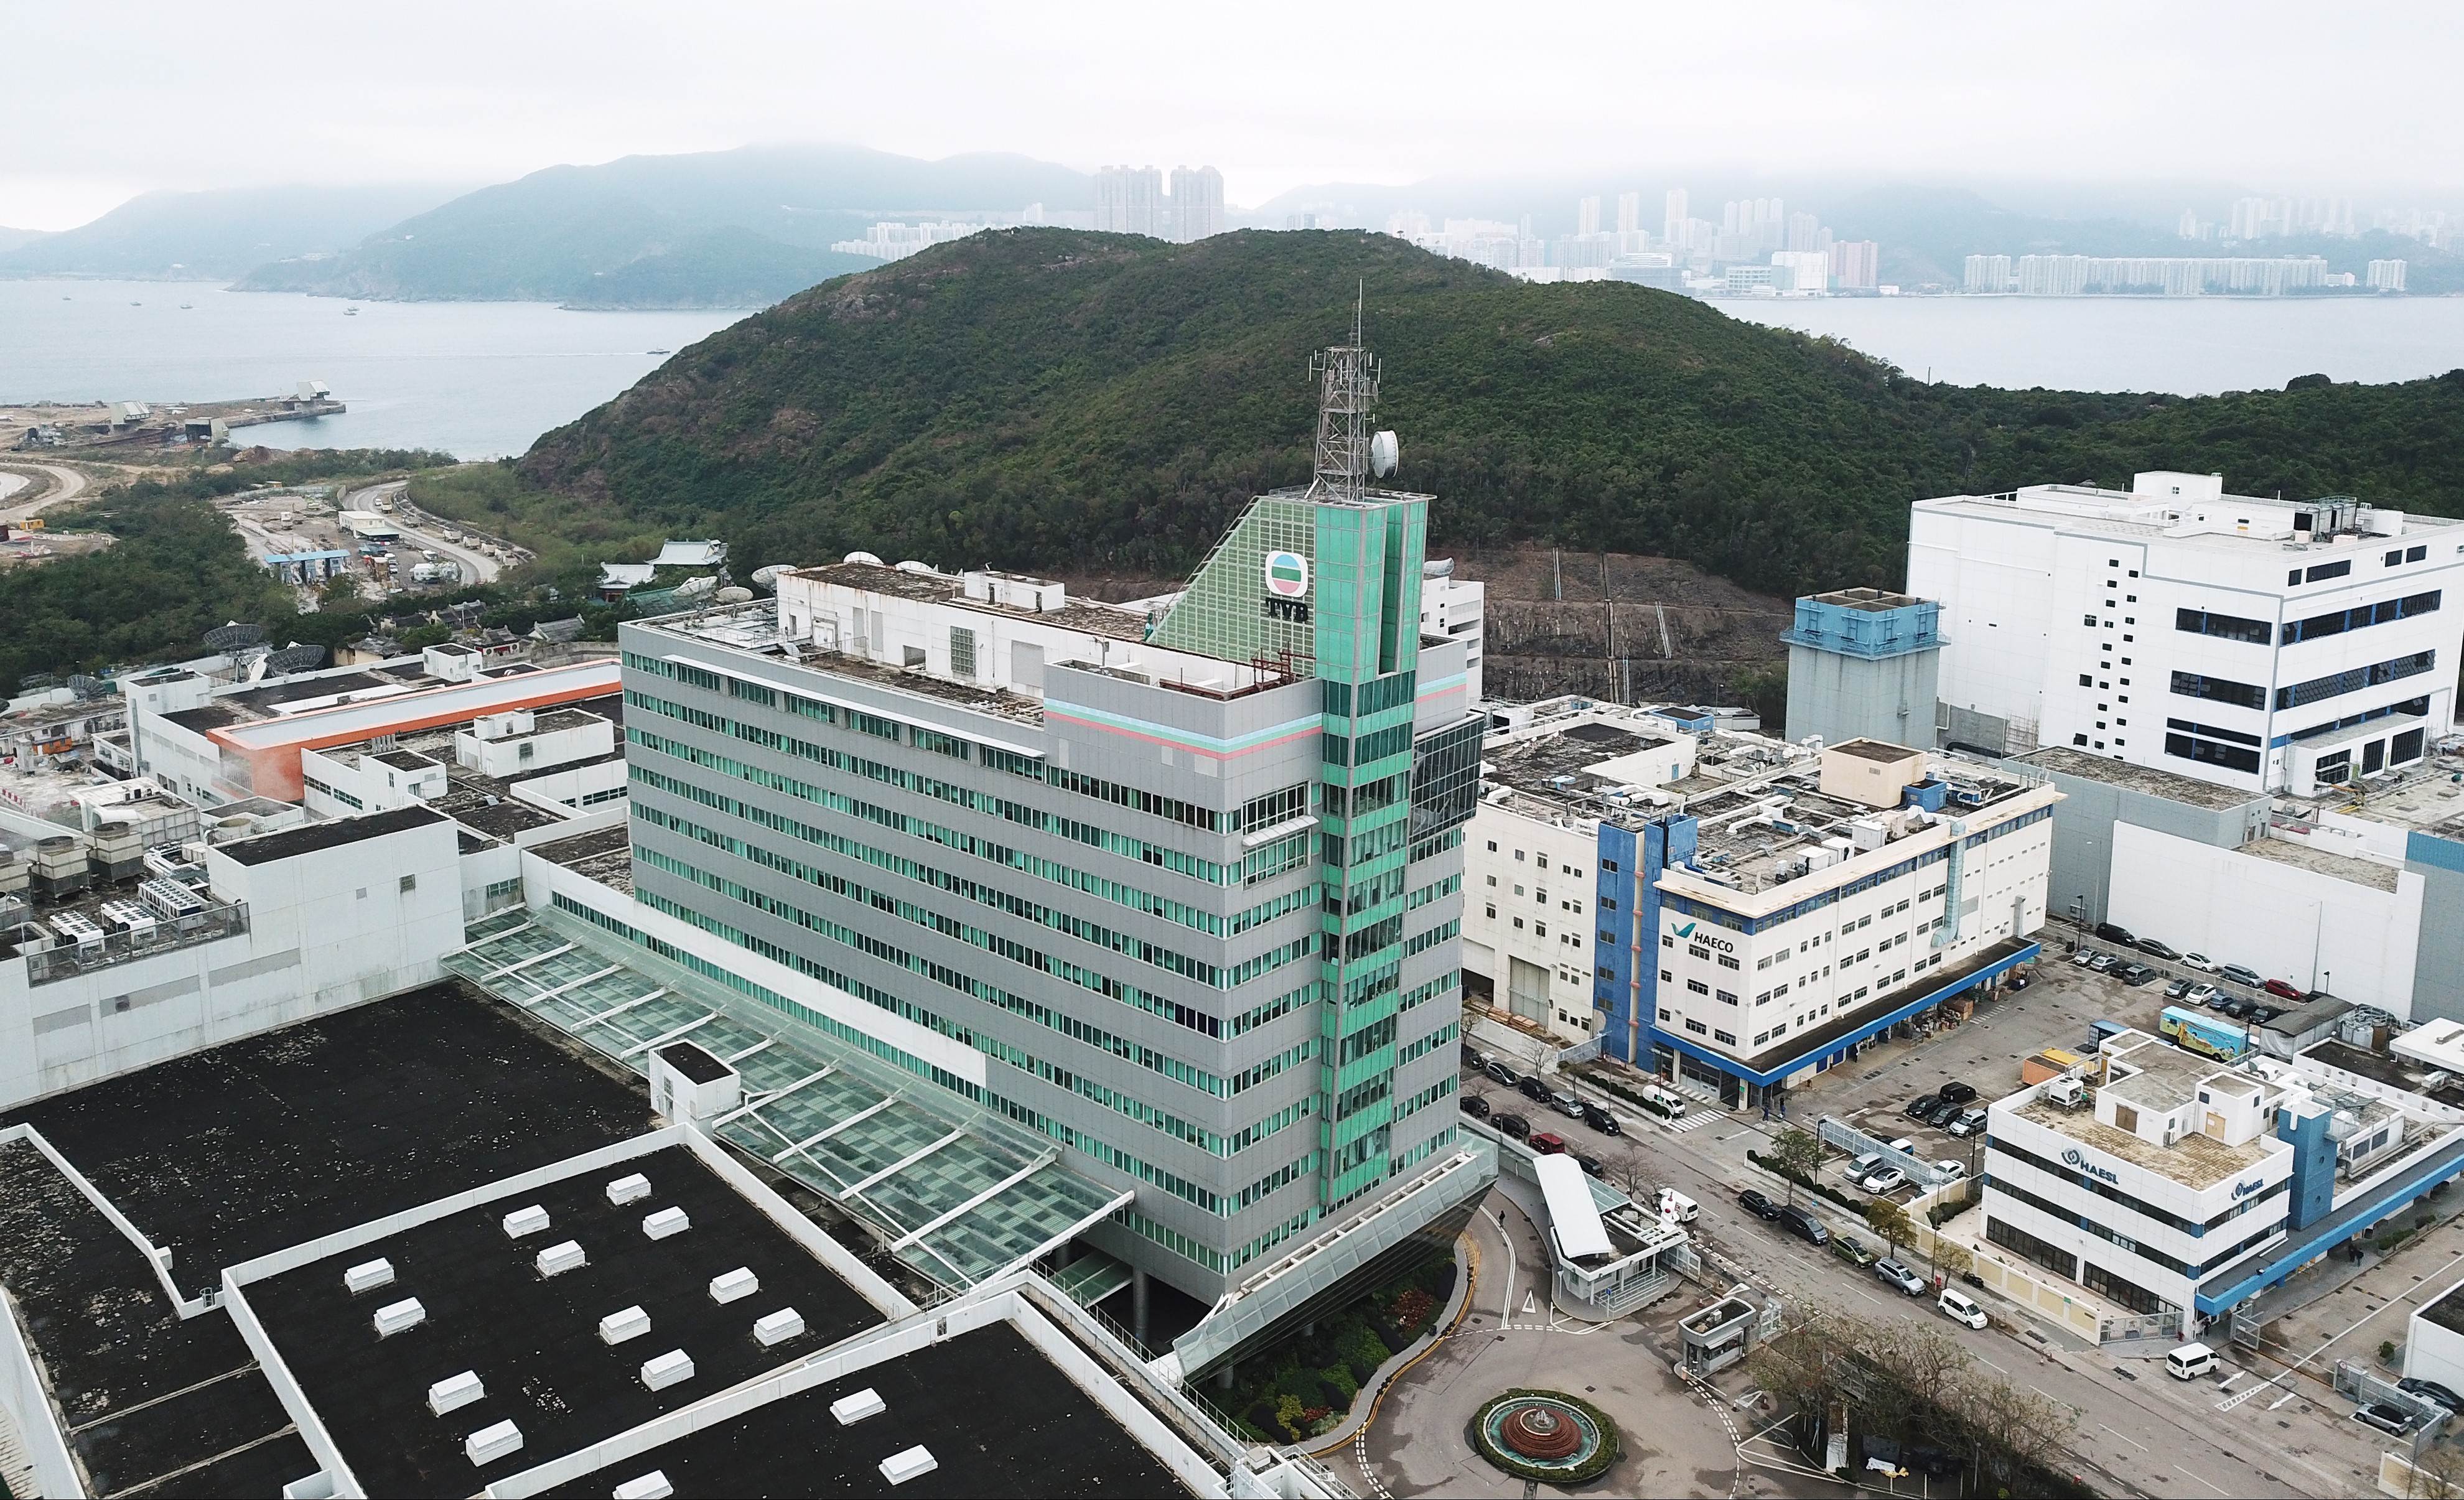 TVB’s headquarters in Tseung Kwan O Industrial Estate. The company has been facing competition in its home market of Hong Kong. Photo: Roy Issa